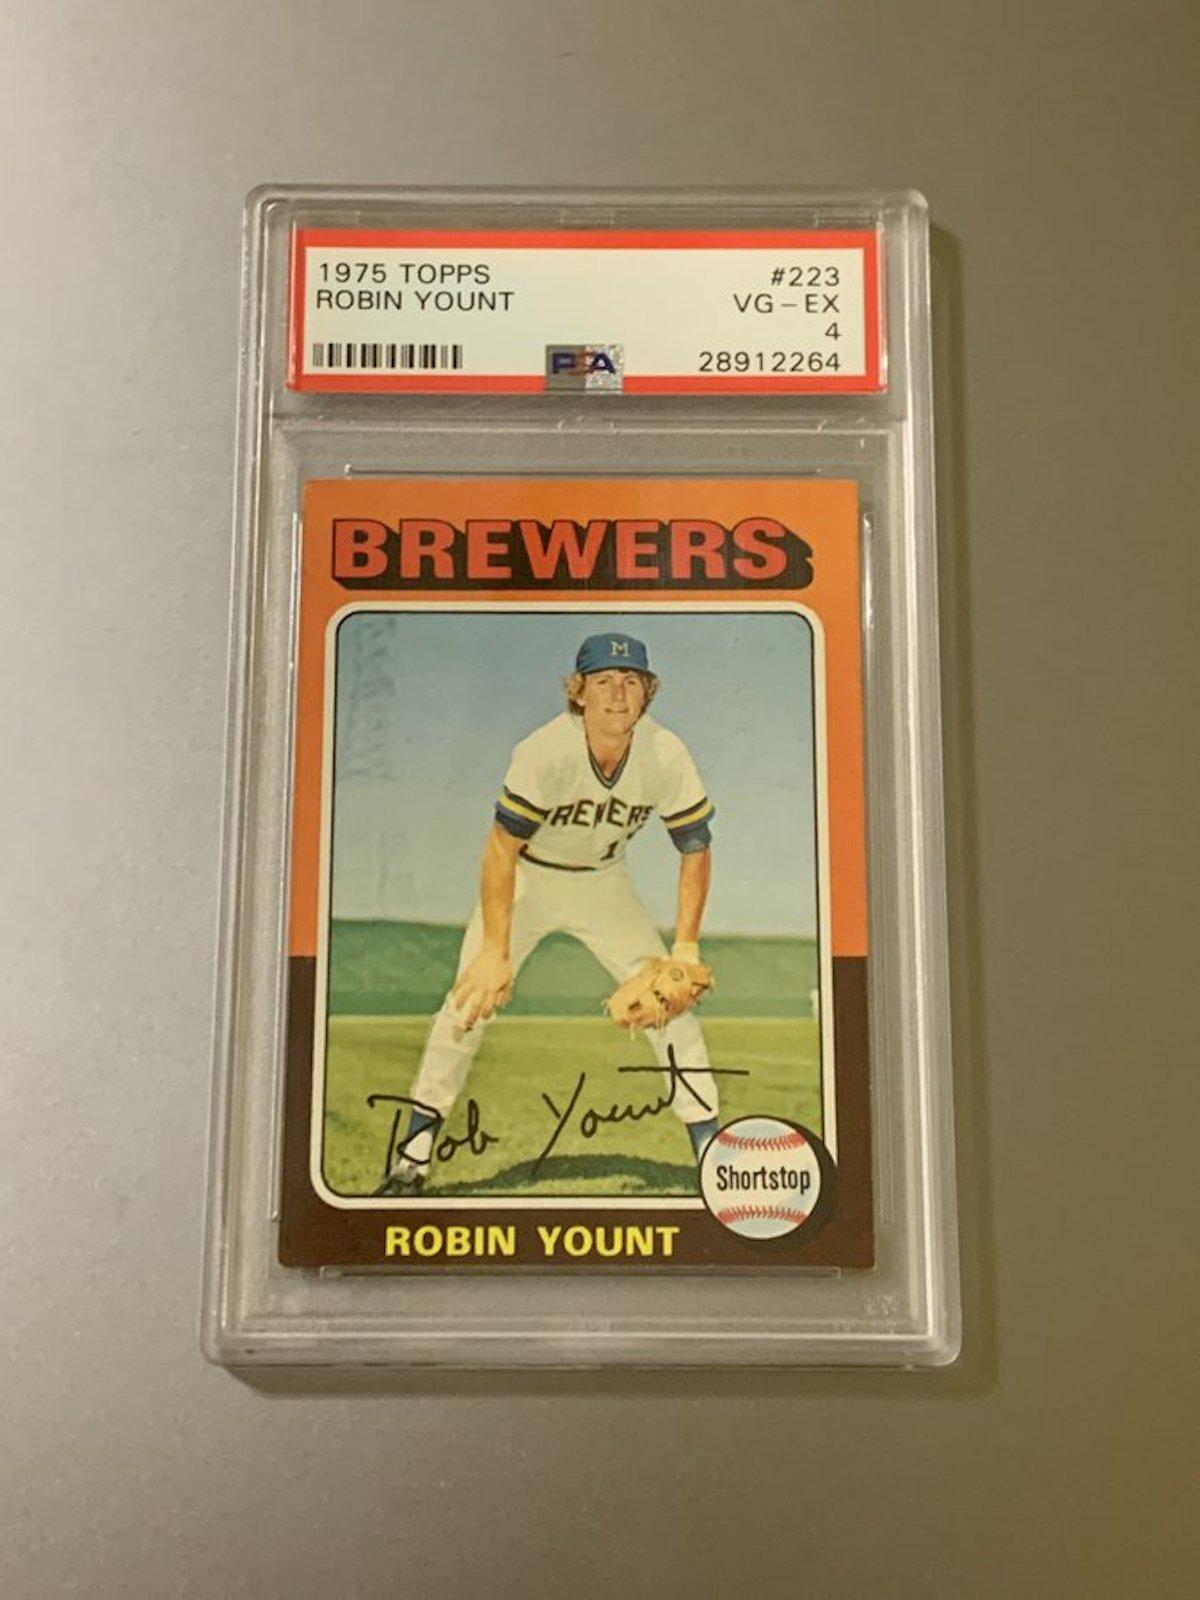 10 Most Valuable Baseball Cards 2000s - Best Investments for